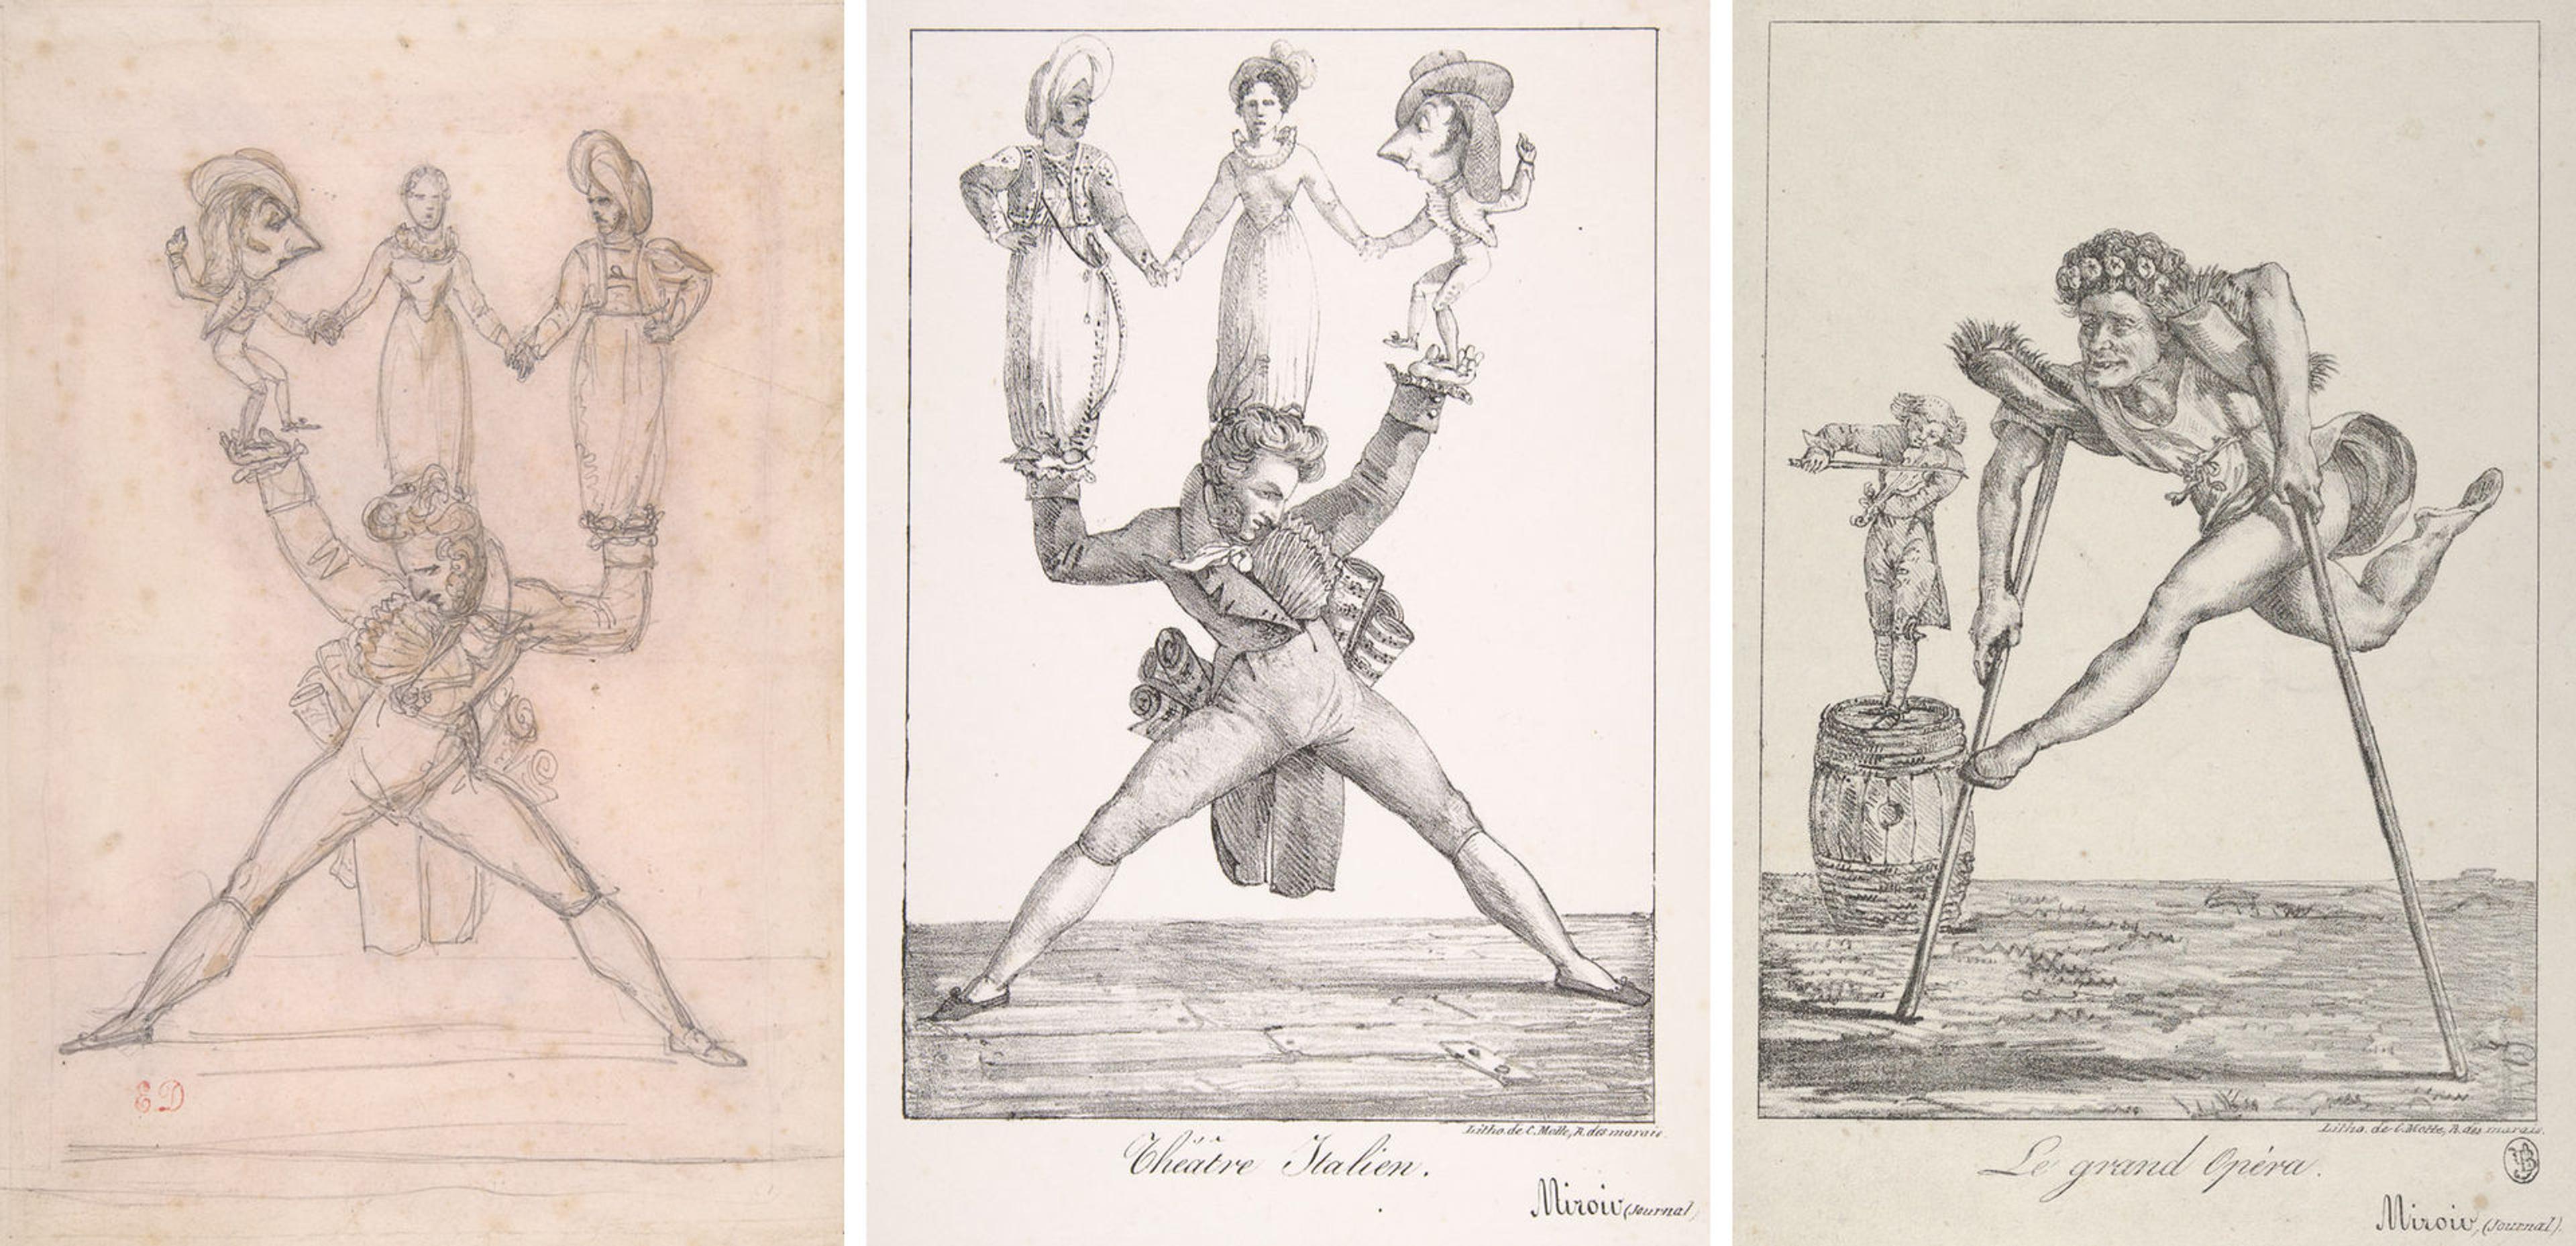 Three satirical works by Eugene Delacroix skewering the opera world: a drawing (left) and two lithographs (center and right)